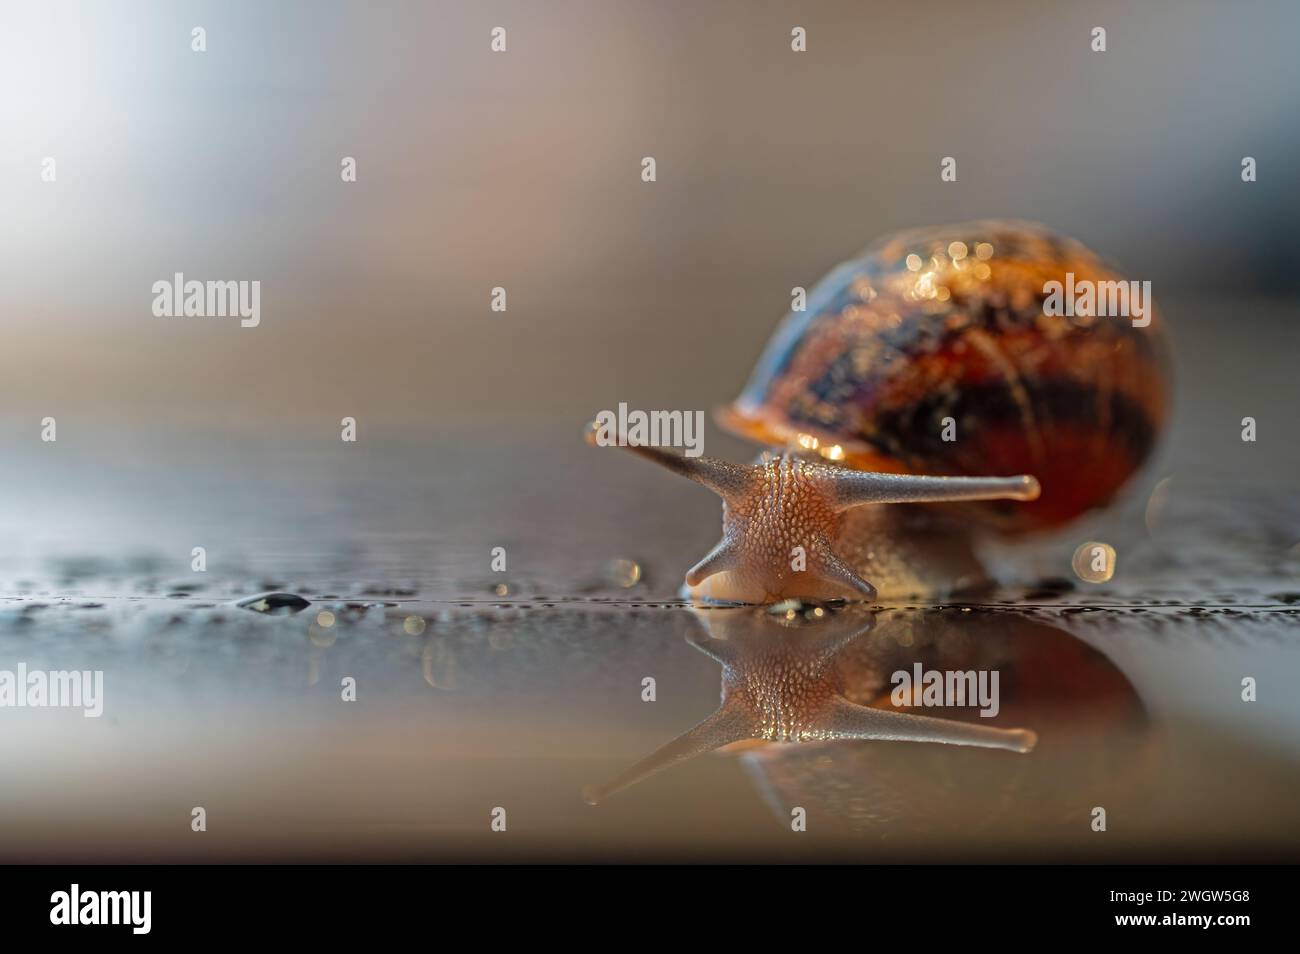 Snails and raindrops on glass. Stock Photo